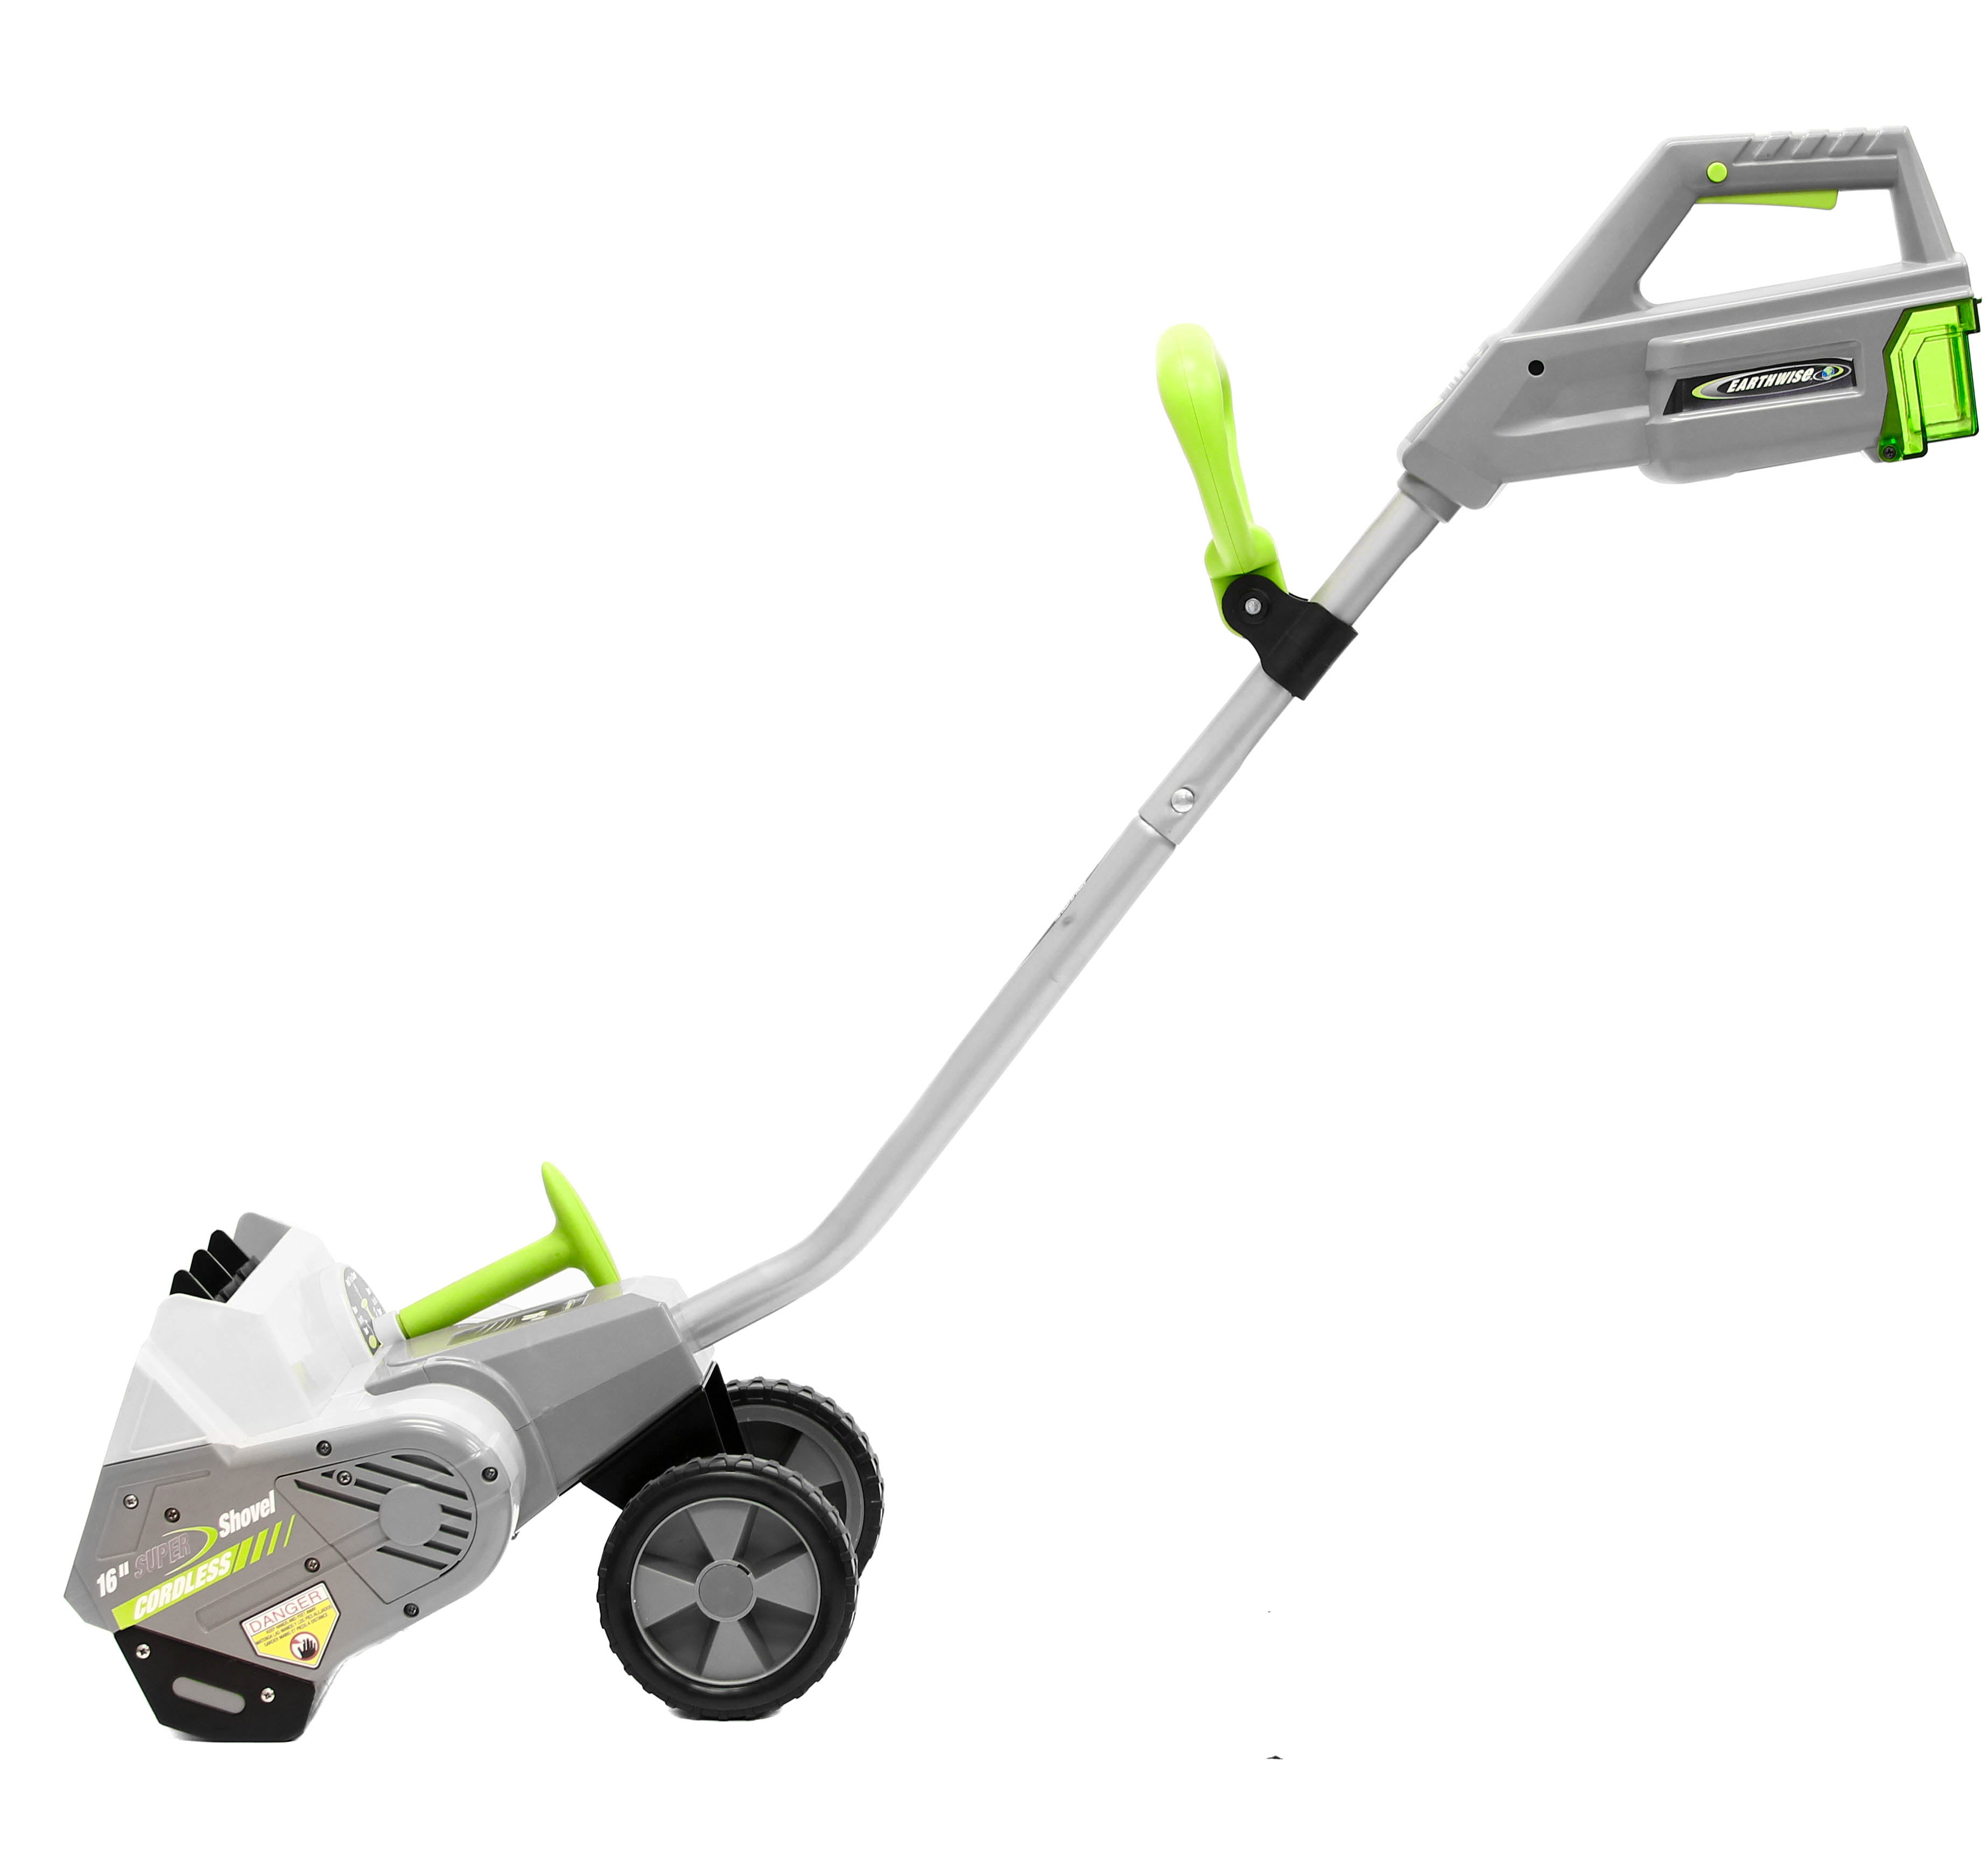 Earthwise Power Tools by ALM 16" 40V 4Ah Lithium Snow Thrower